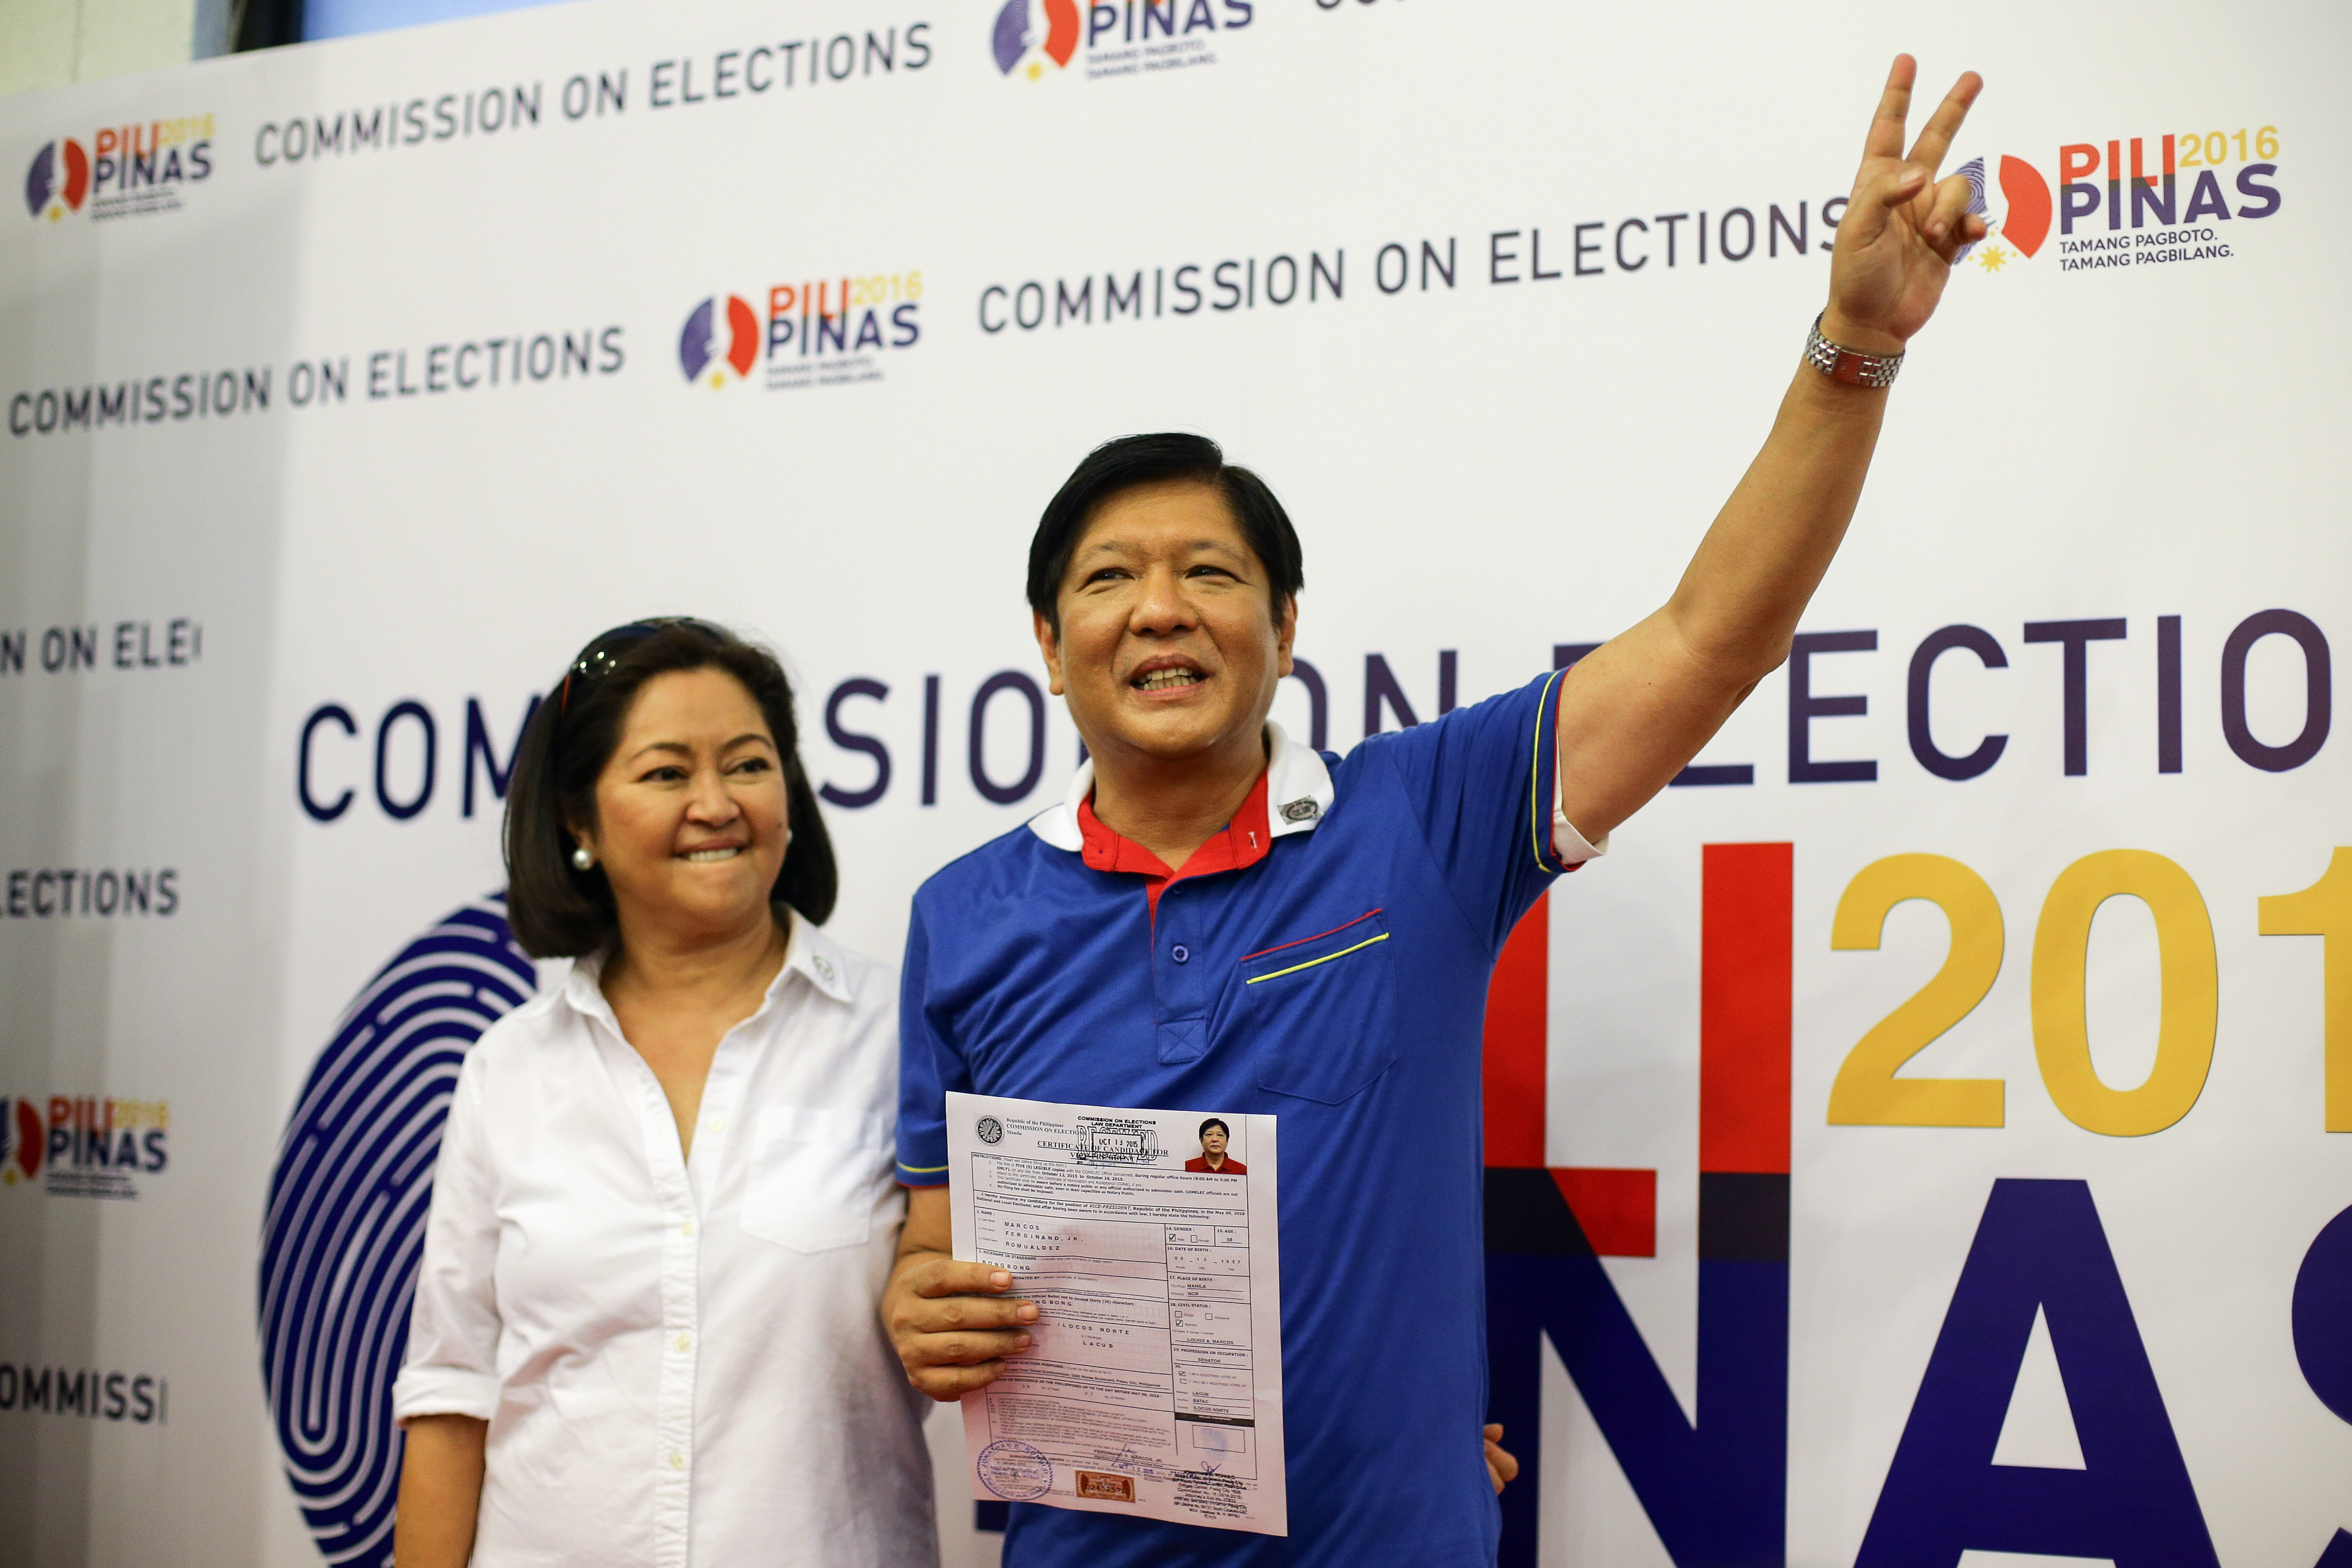 VP BID. Senator Bongbong Marcos has officially joined the roster of vice presidential candidates in the 2016 elections. Photo by Mark Cristino/EPA 